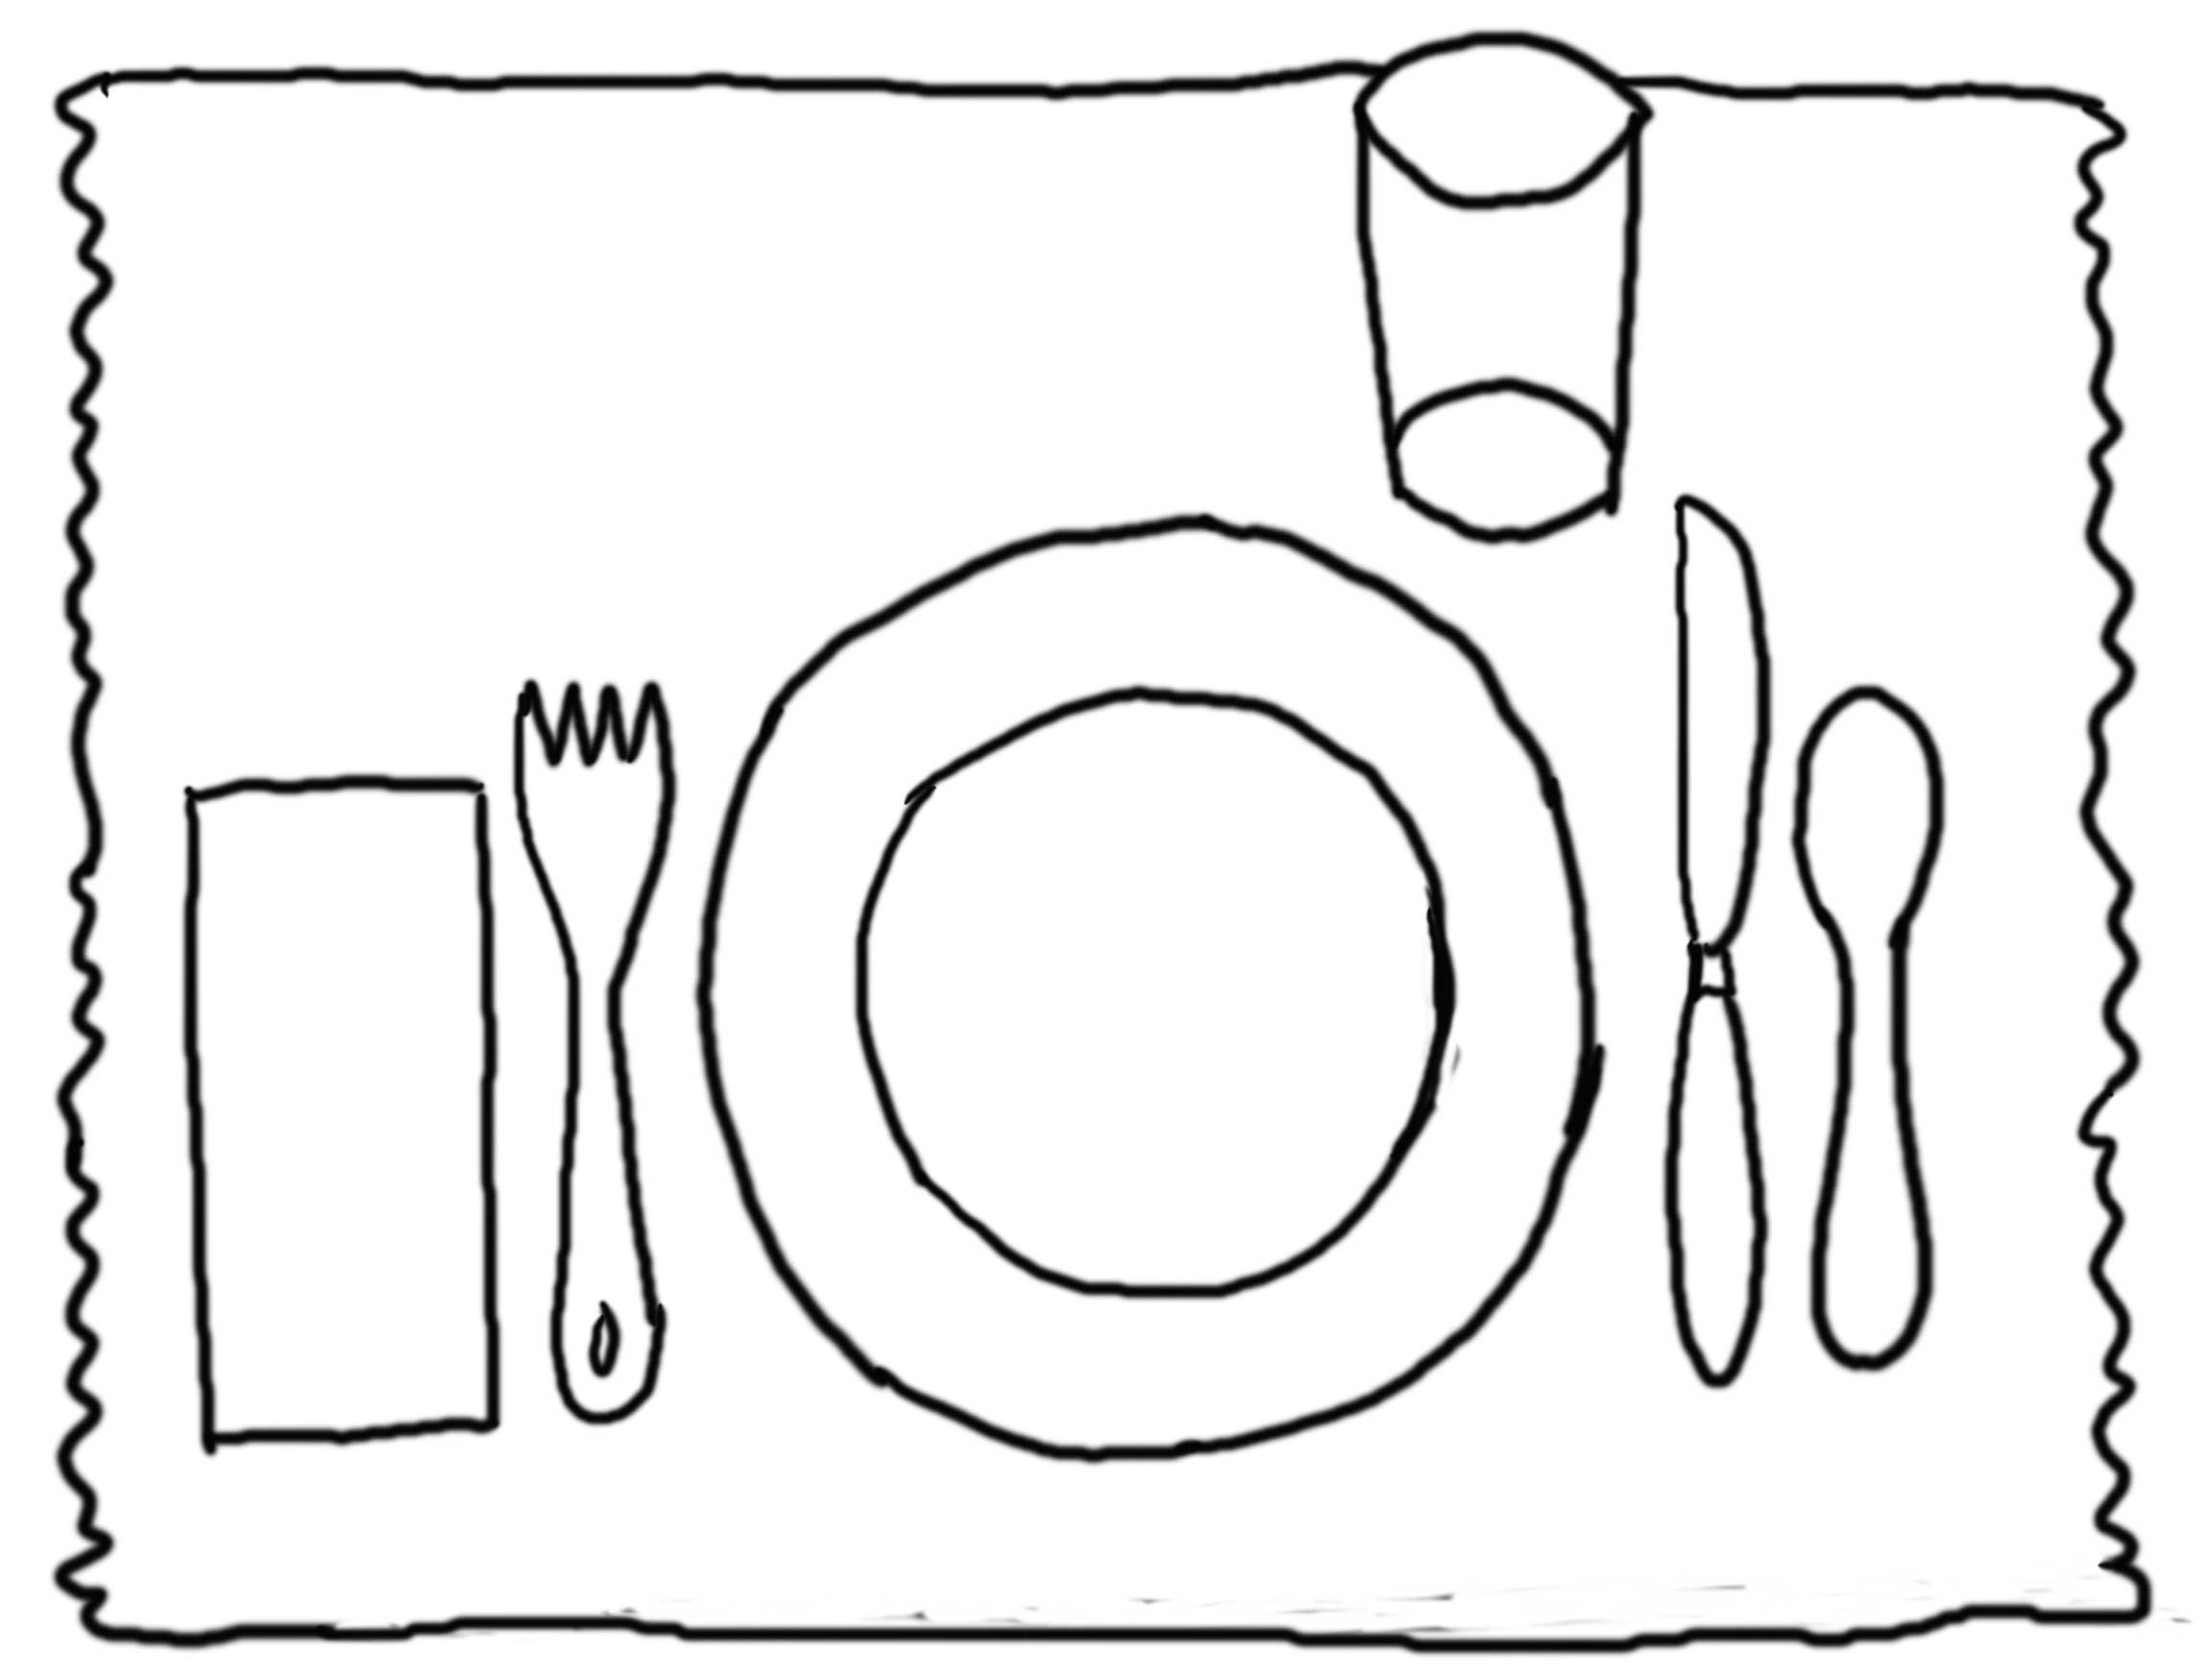 Table Manners Coloring Pages - Colorine.net | #17928